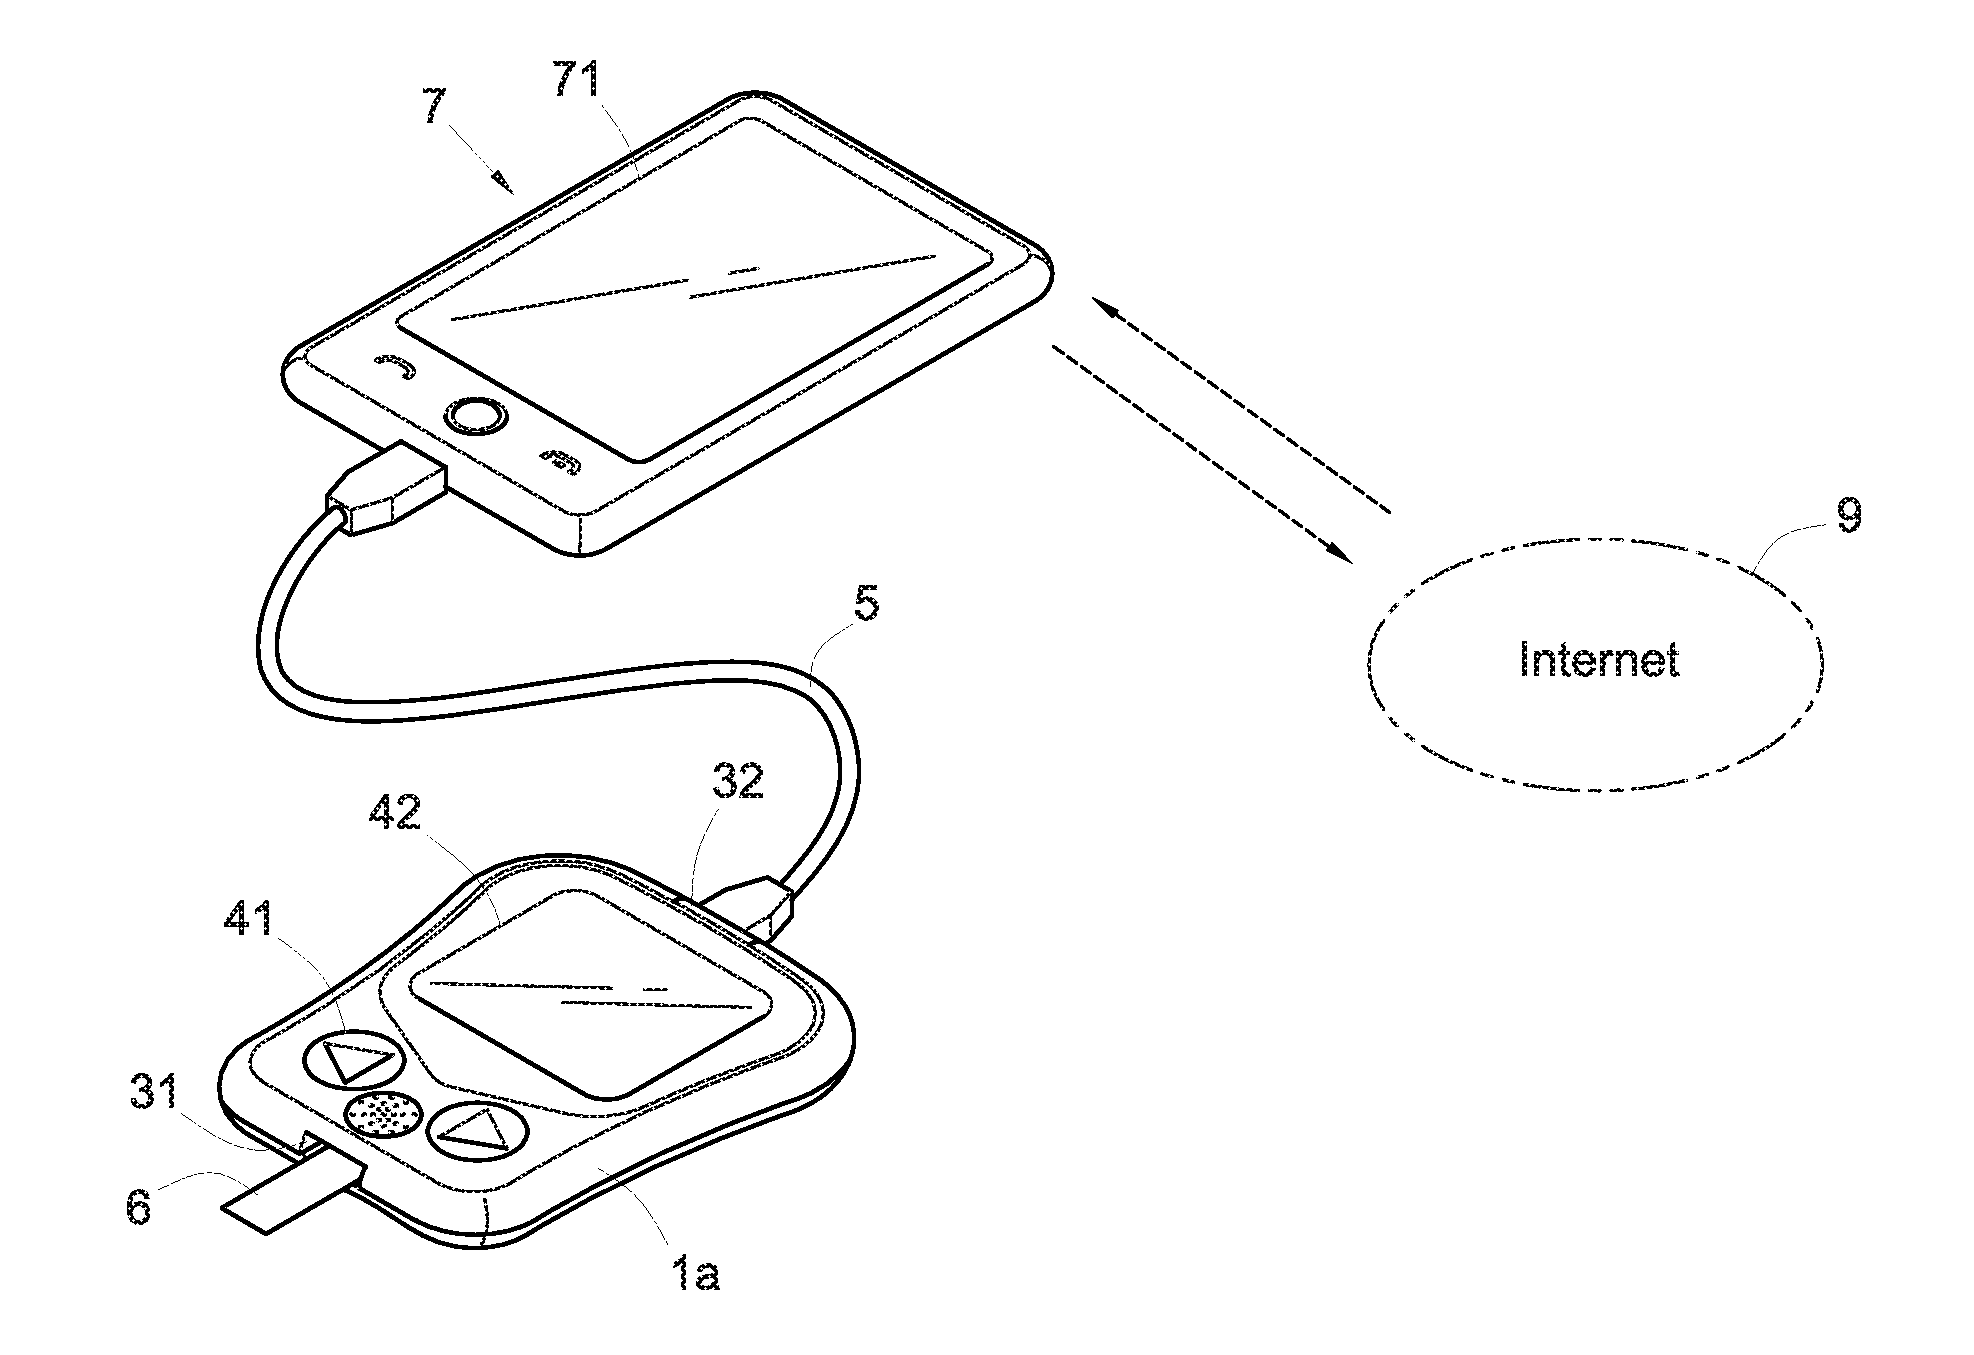 Blood glucose measuring kit connectable to mobile device